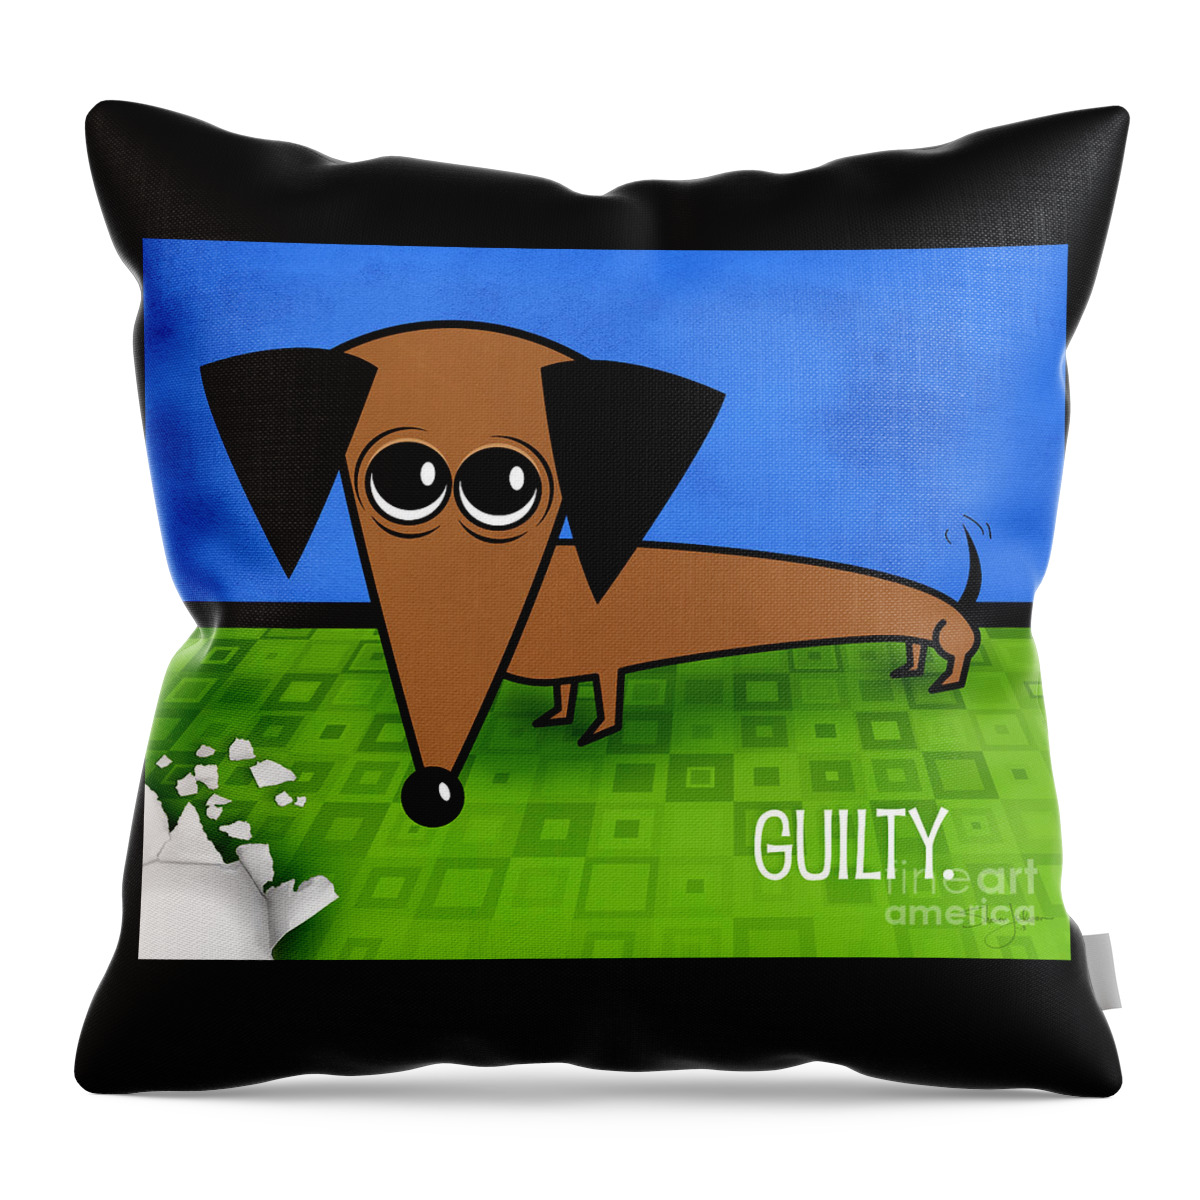 Dachshund Throw Pillow featuring the mixed media Guilty by Shevon Johnson